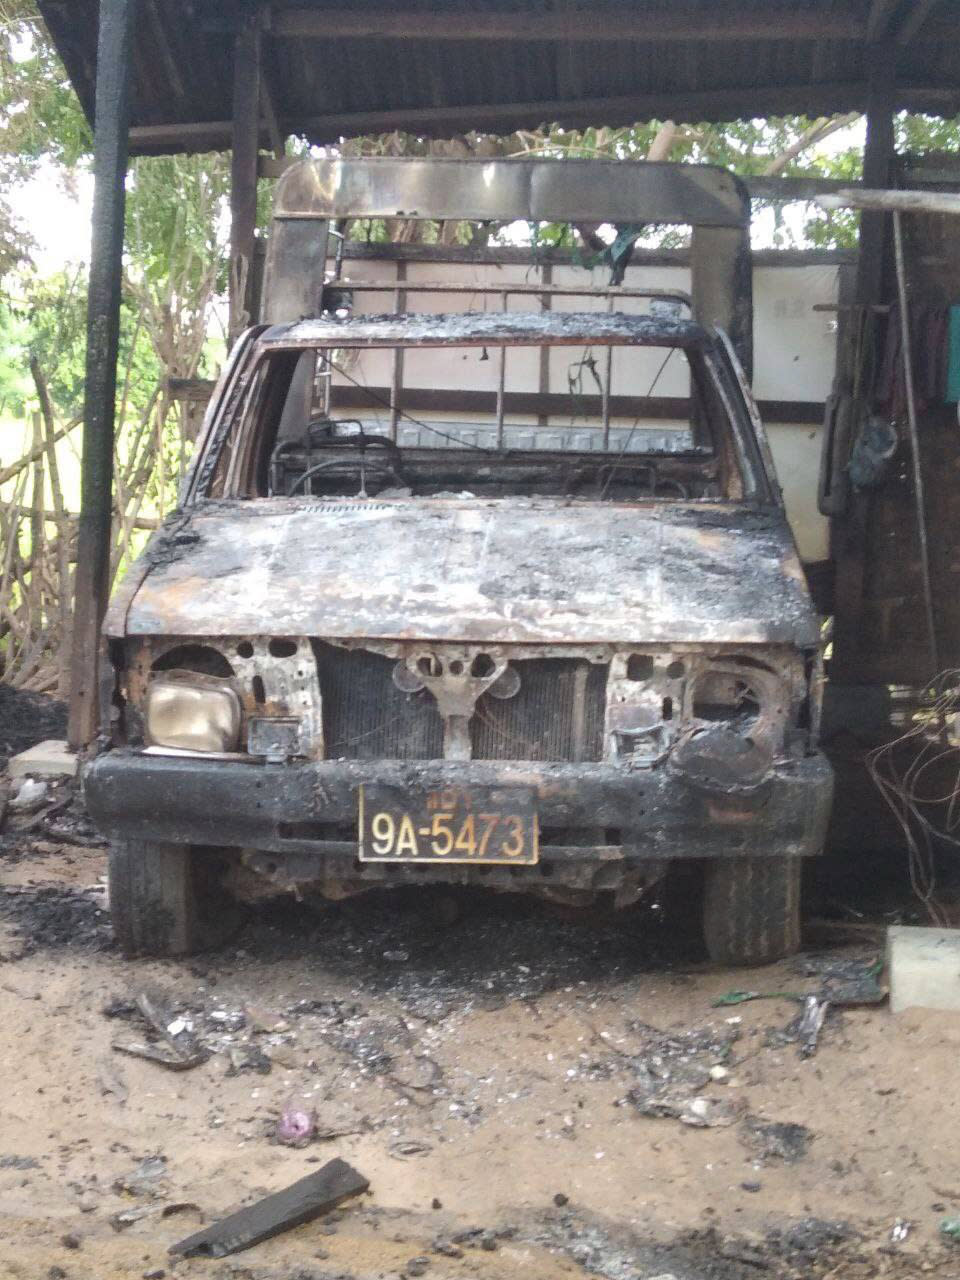 A burnt vehicle stands within a monastery that houses a middle school in Let Yet Kone village in Tabayin township in the Sagaing region of Myanmar on Saturday, Sept. 17, 2022, the day after an air strike hit the school. The attack killed a number of adults and children, according to a school administrator and volunteers assisting displaced people. (AP Photo)